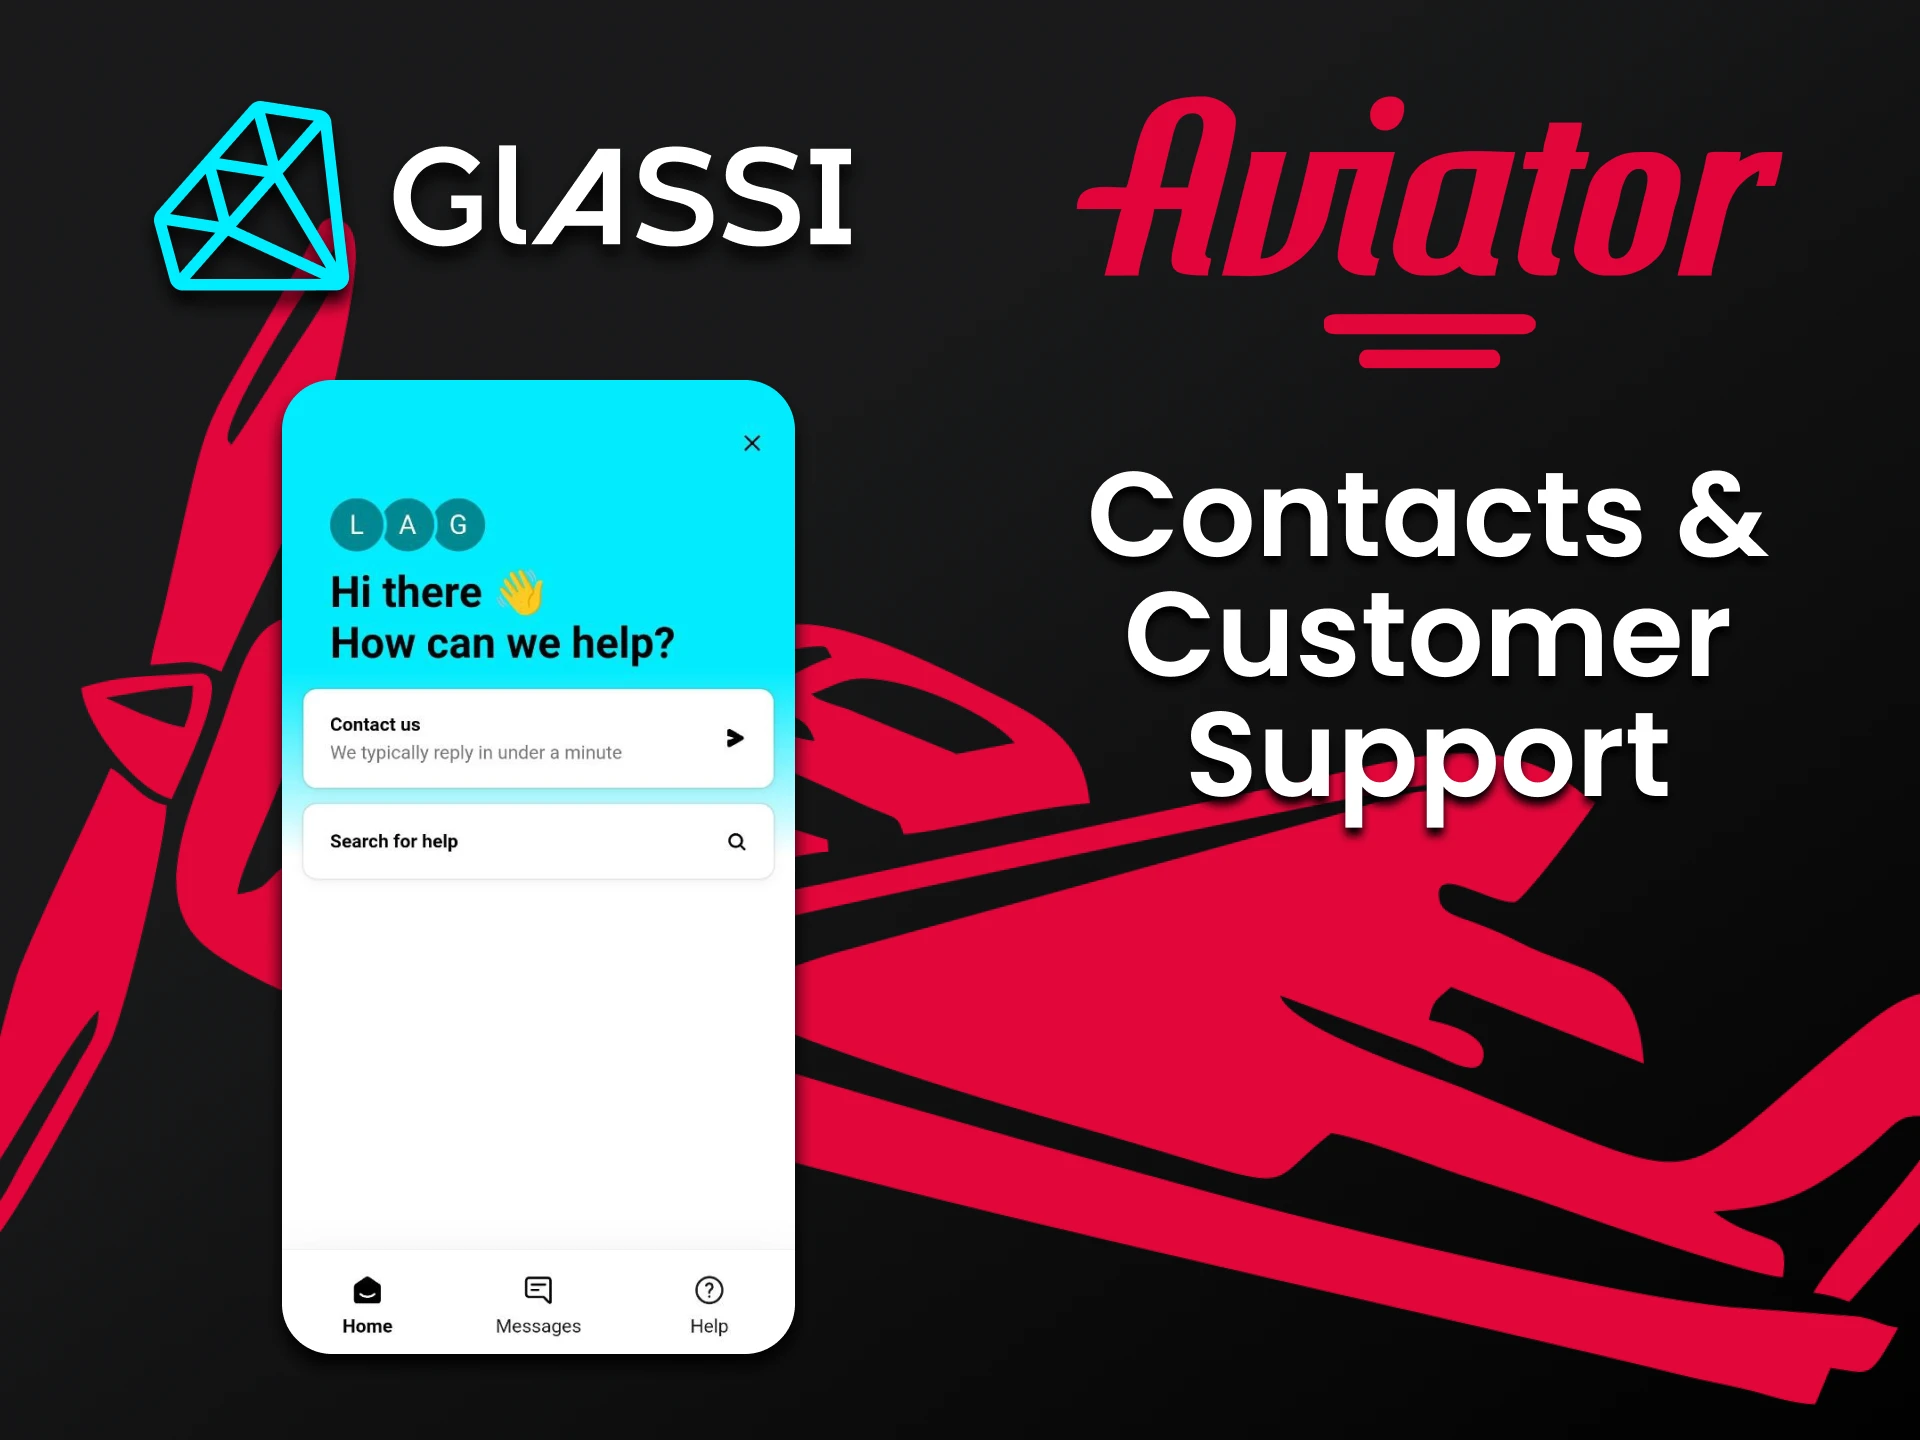 We will tell you about ways to contact the Glassi Casino team for Aviator.